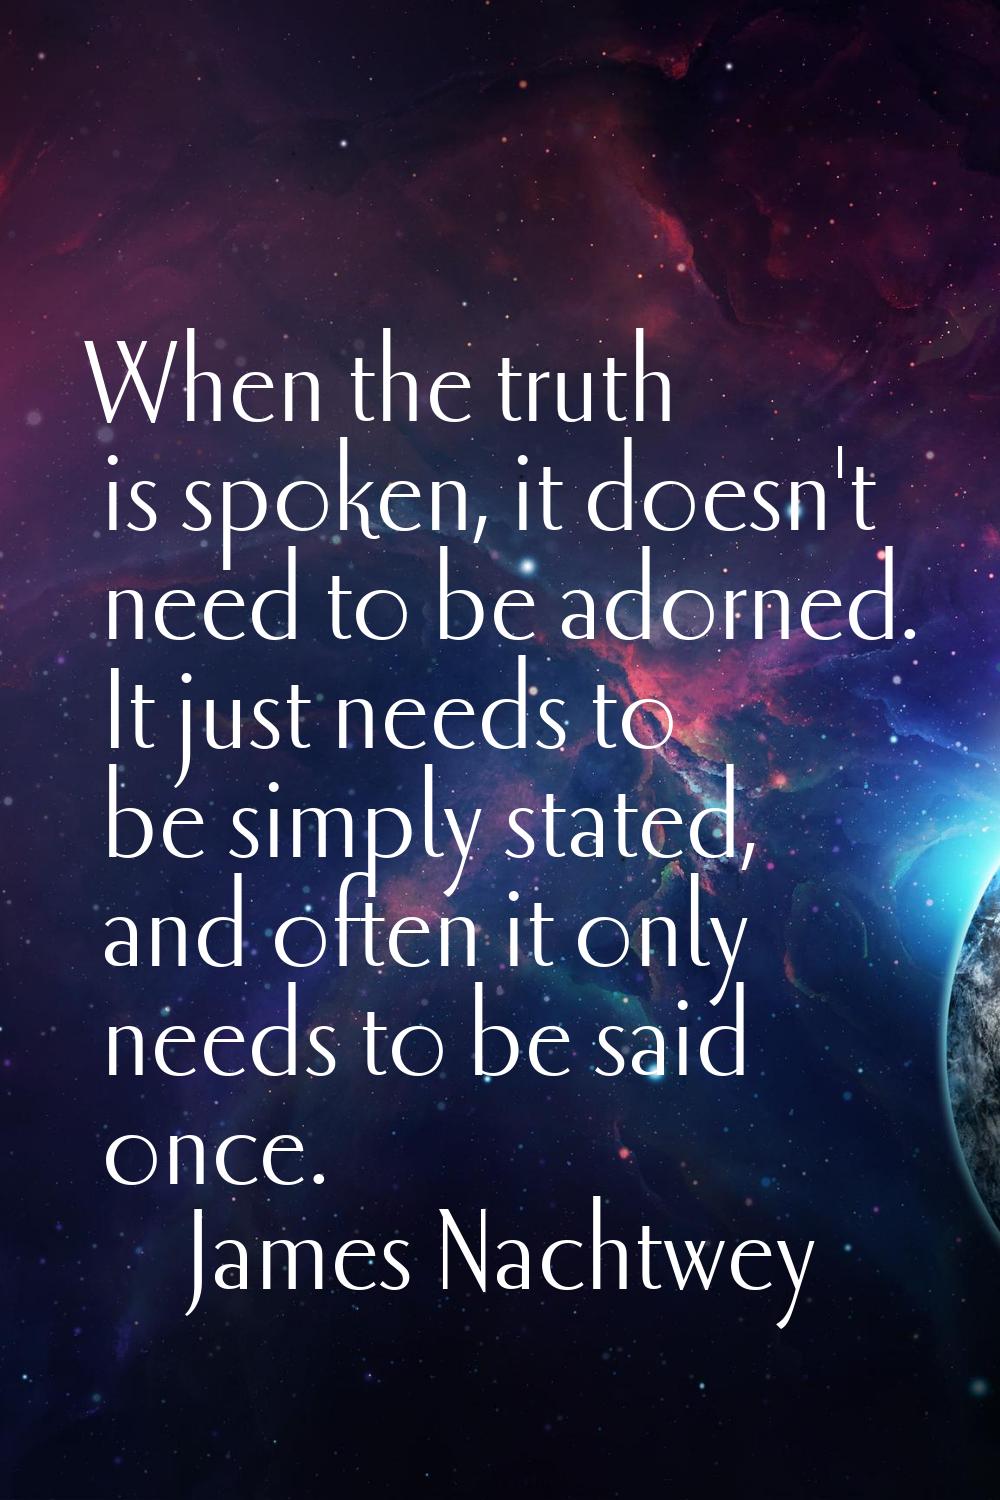 When the truth is spoken, it doesn't need to be adorned. It just needs to be simply stated, and oft